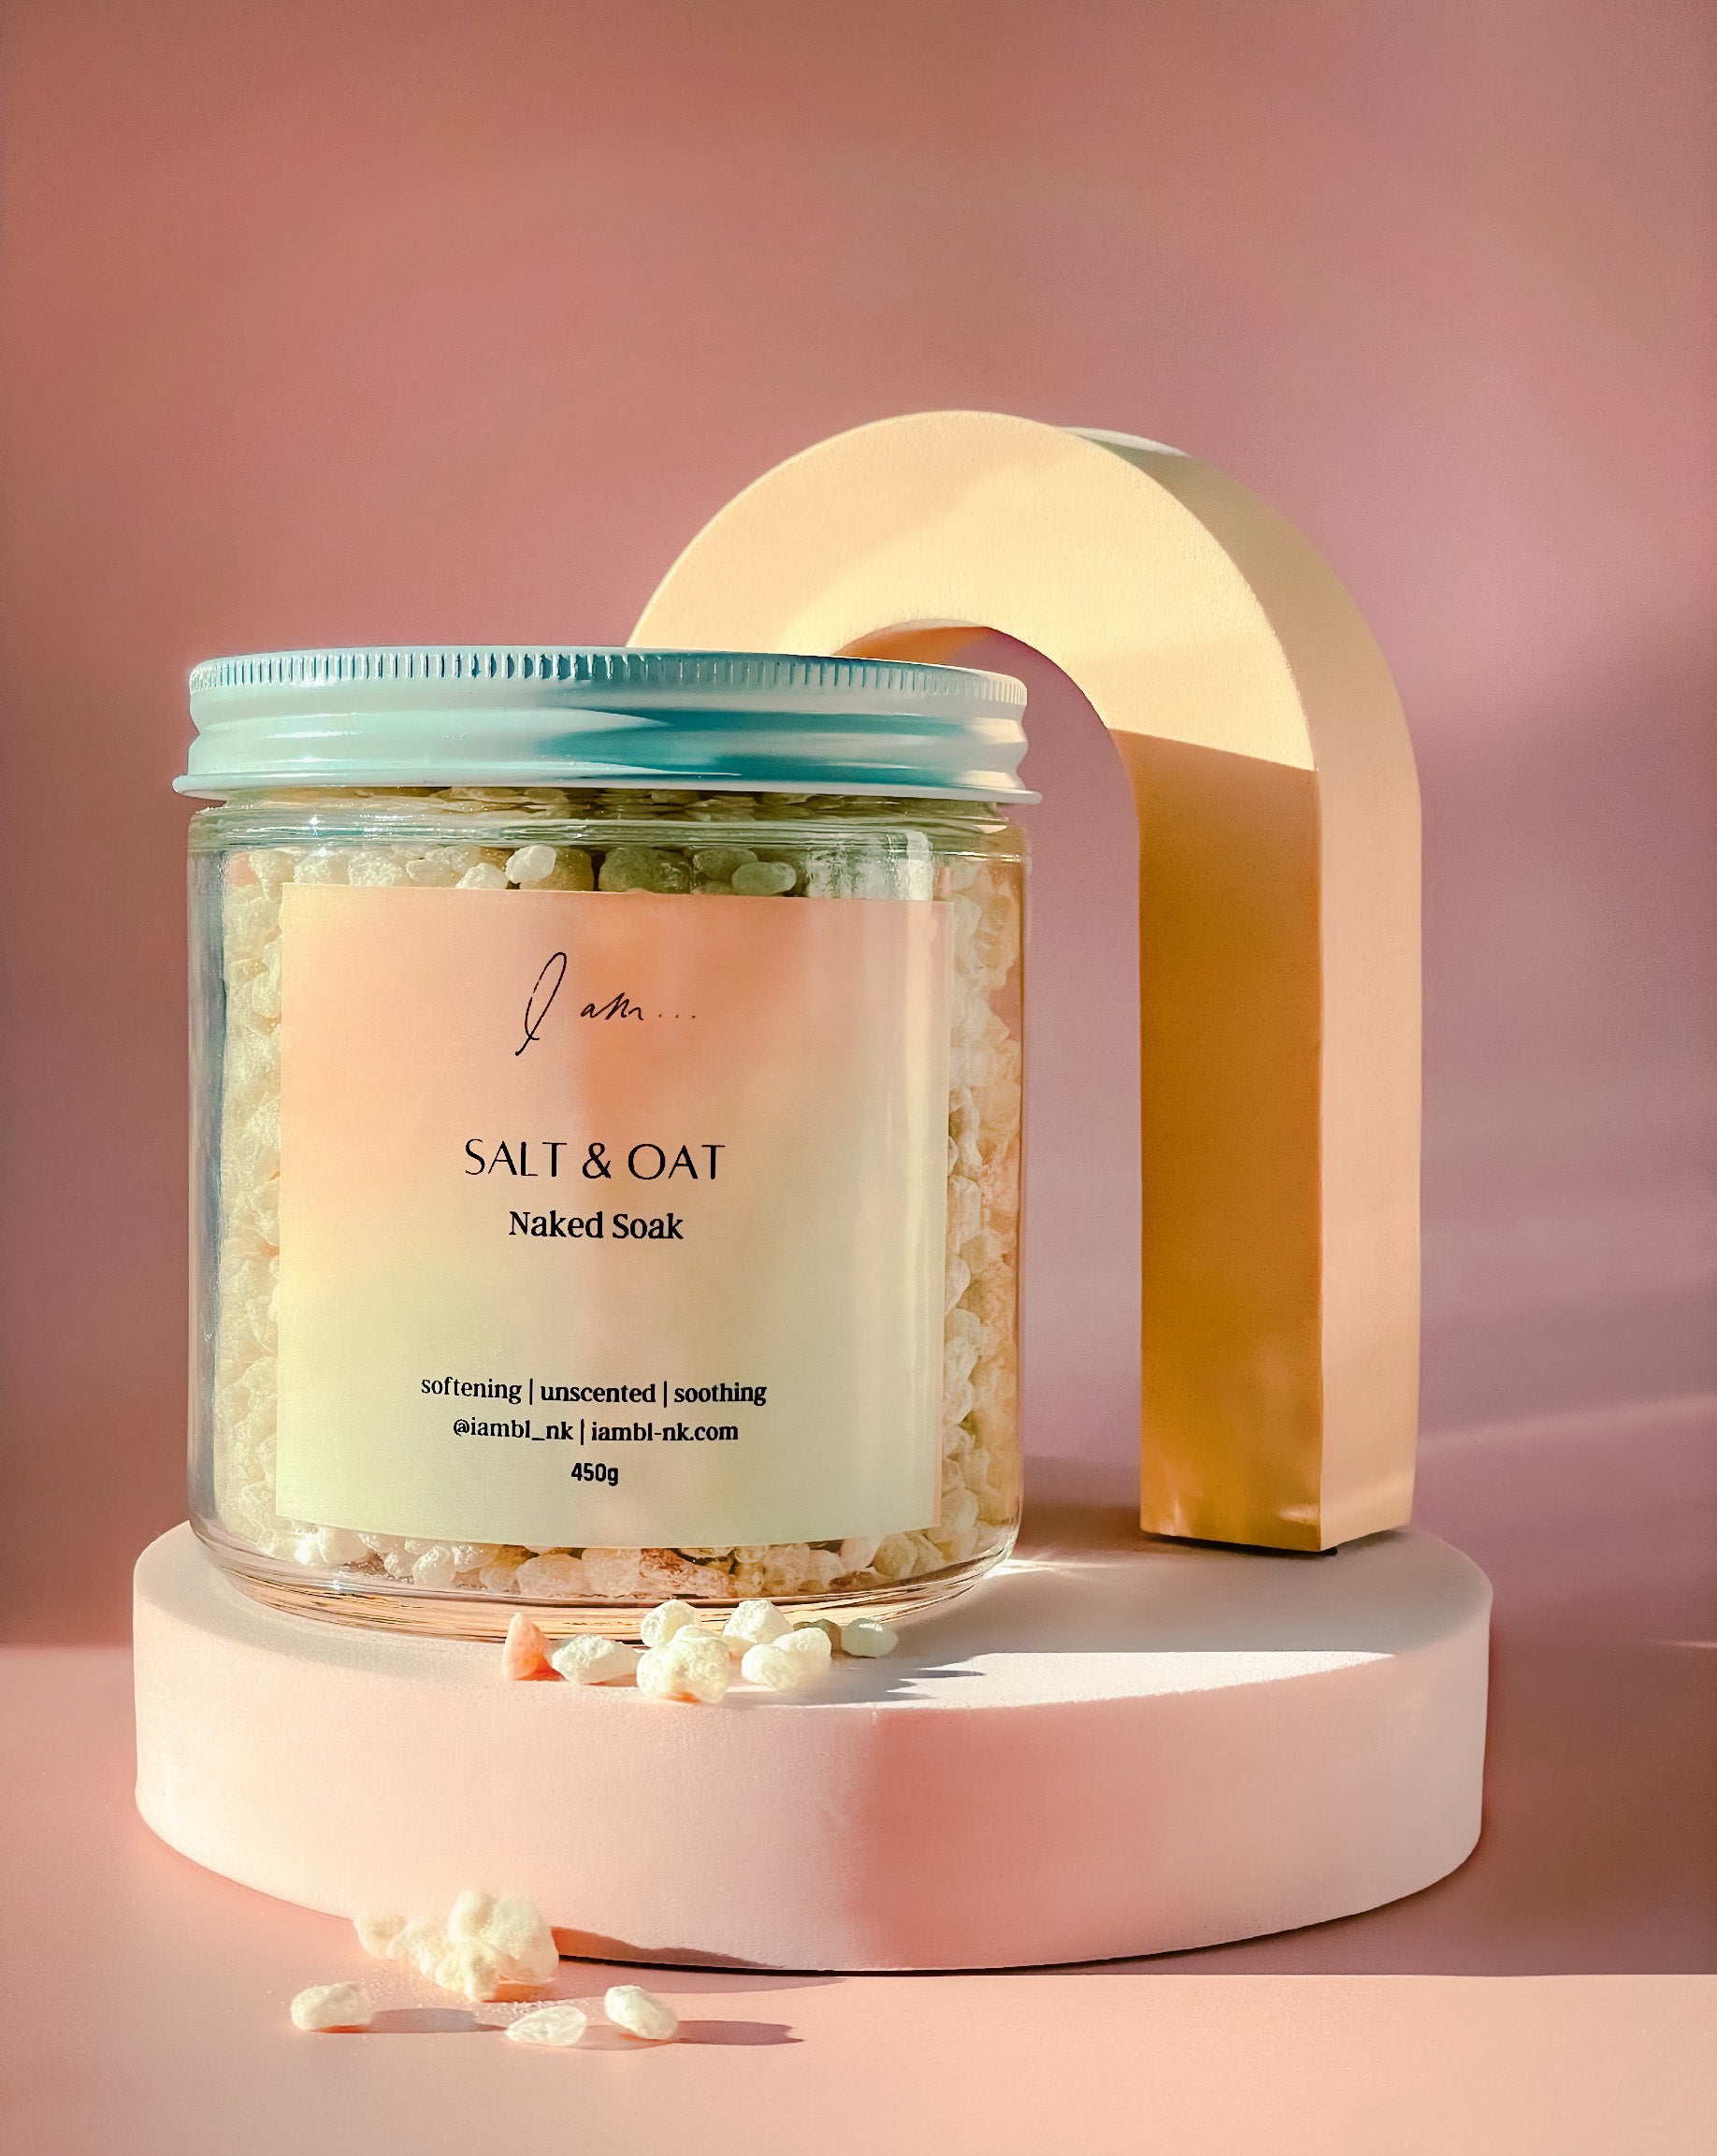 Me-Time Rose de mai soak, photo shows a jar flat lay with soak salts and colloidal oats pouring out of the jar